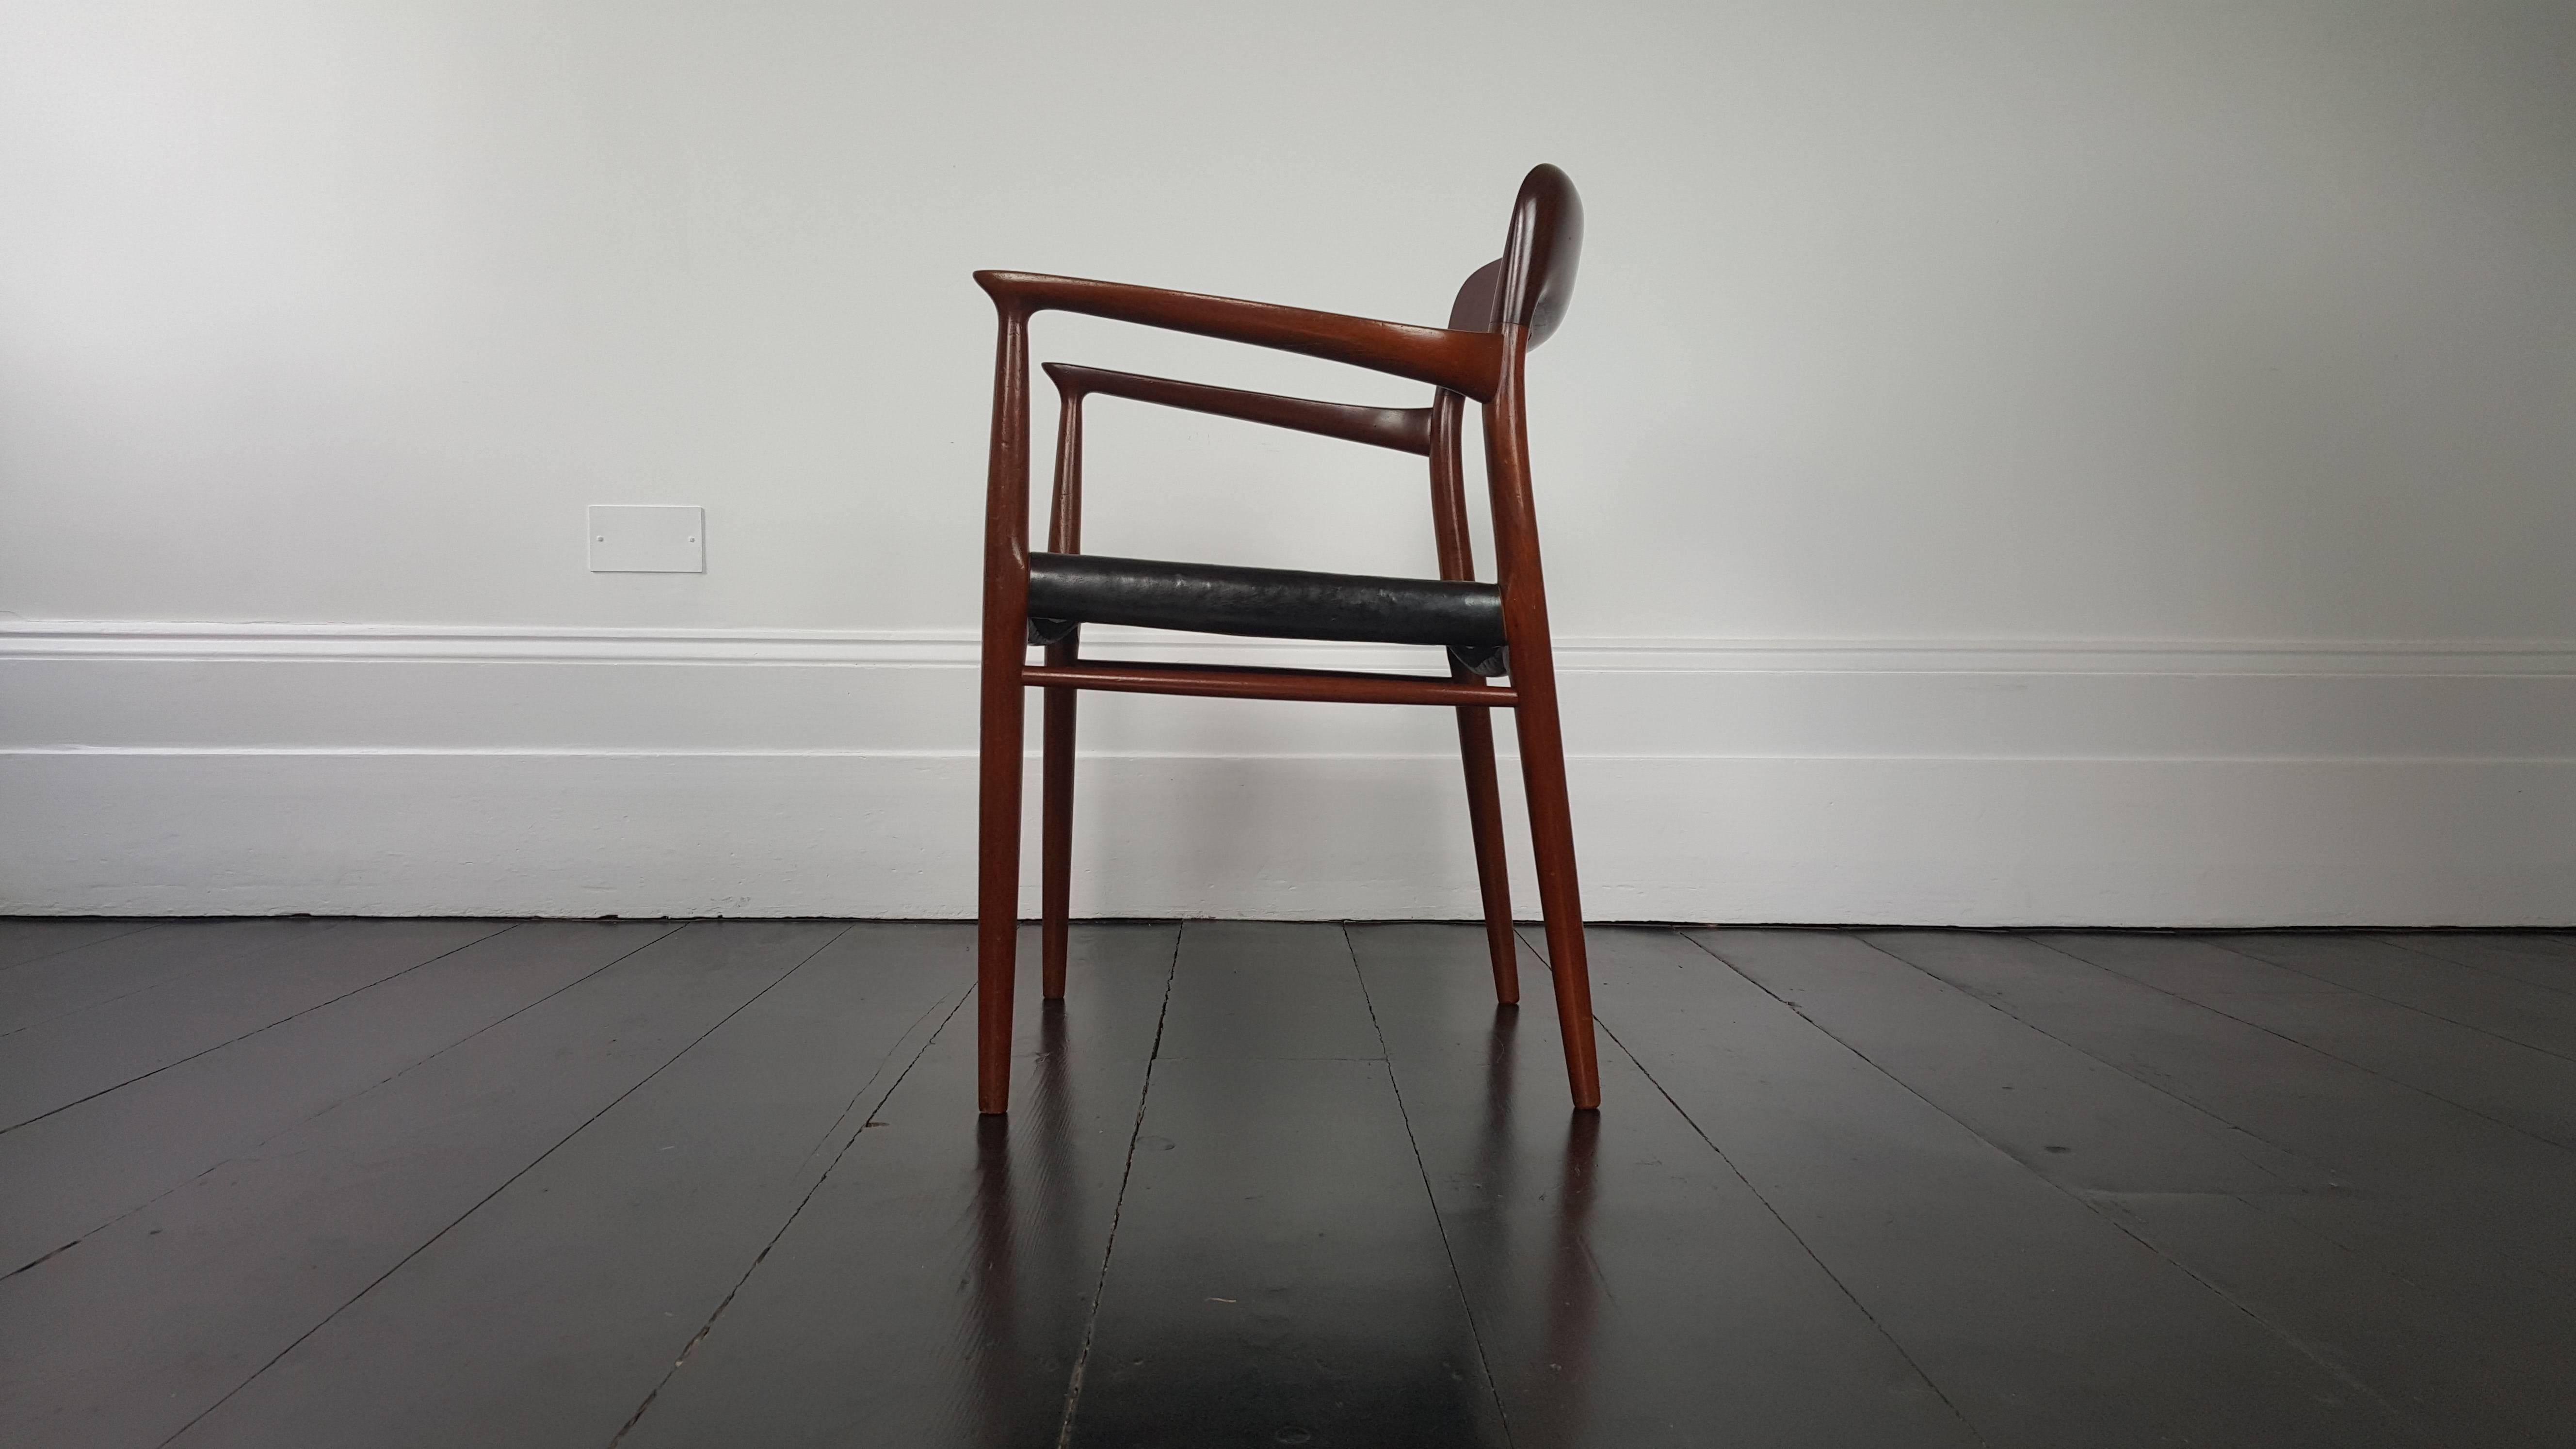 A Model 56 armchair in teak and black leather by Niels Otto Møller for J. L. Møller, Denmark, 1954.
 
A beautifully shaped frame crafted in solid teak with a seat pad covered in black leather which has great patina.

Please contact us via the